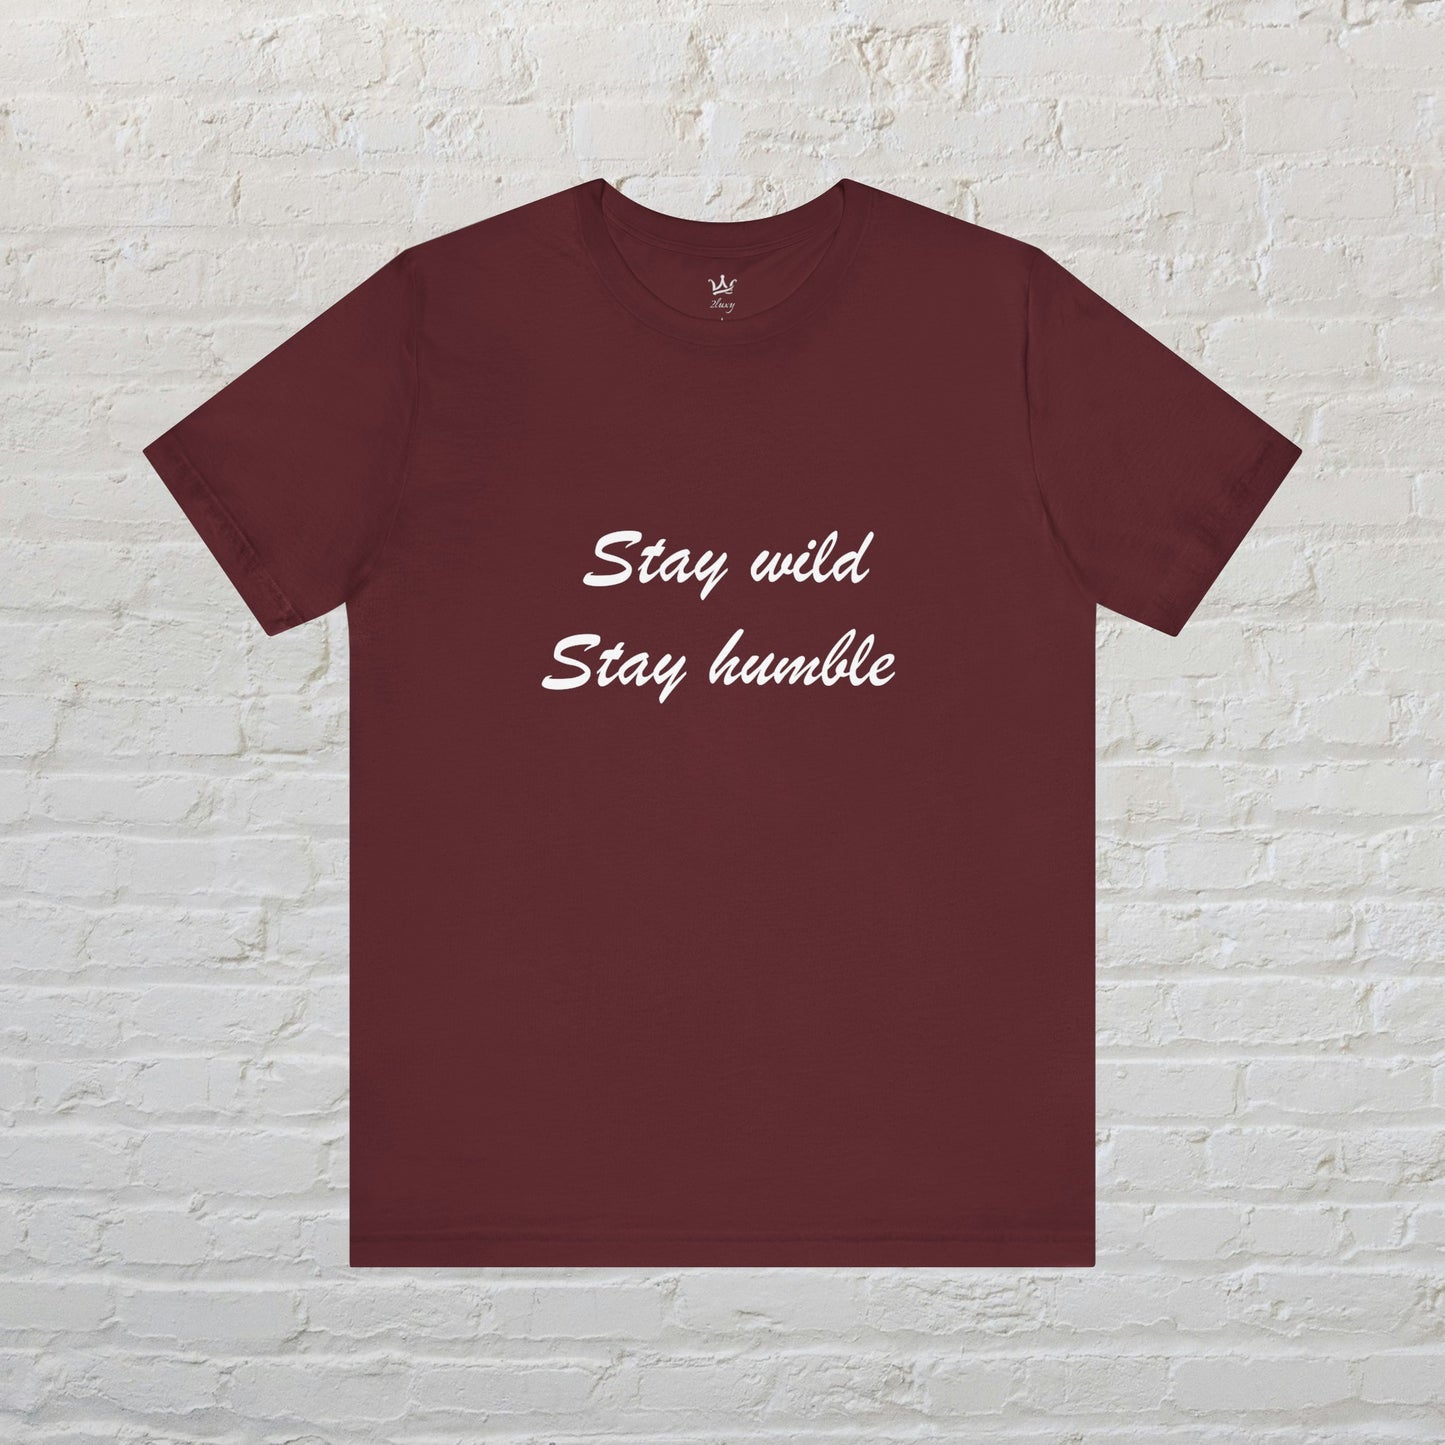 Jersey Sleeve Tee Stay wild Stay humble